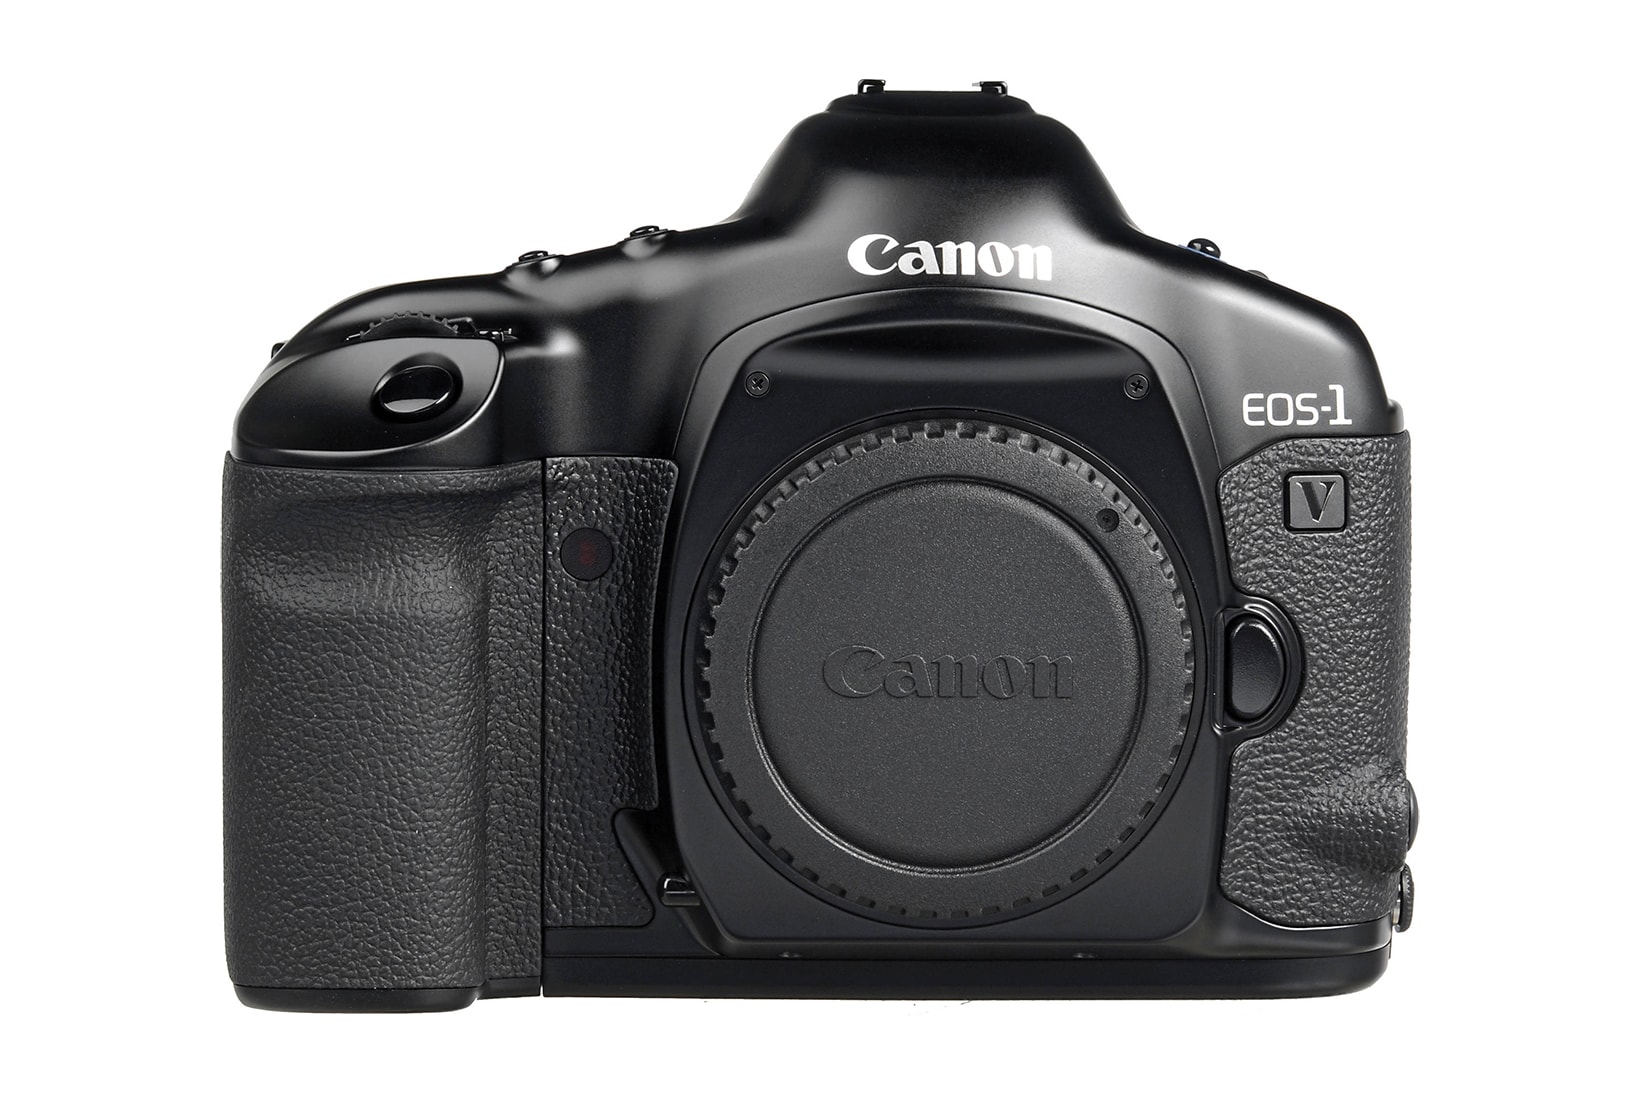 Canon EOS 1V Film Camera Discontinued discontinue exit business last sell